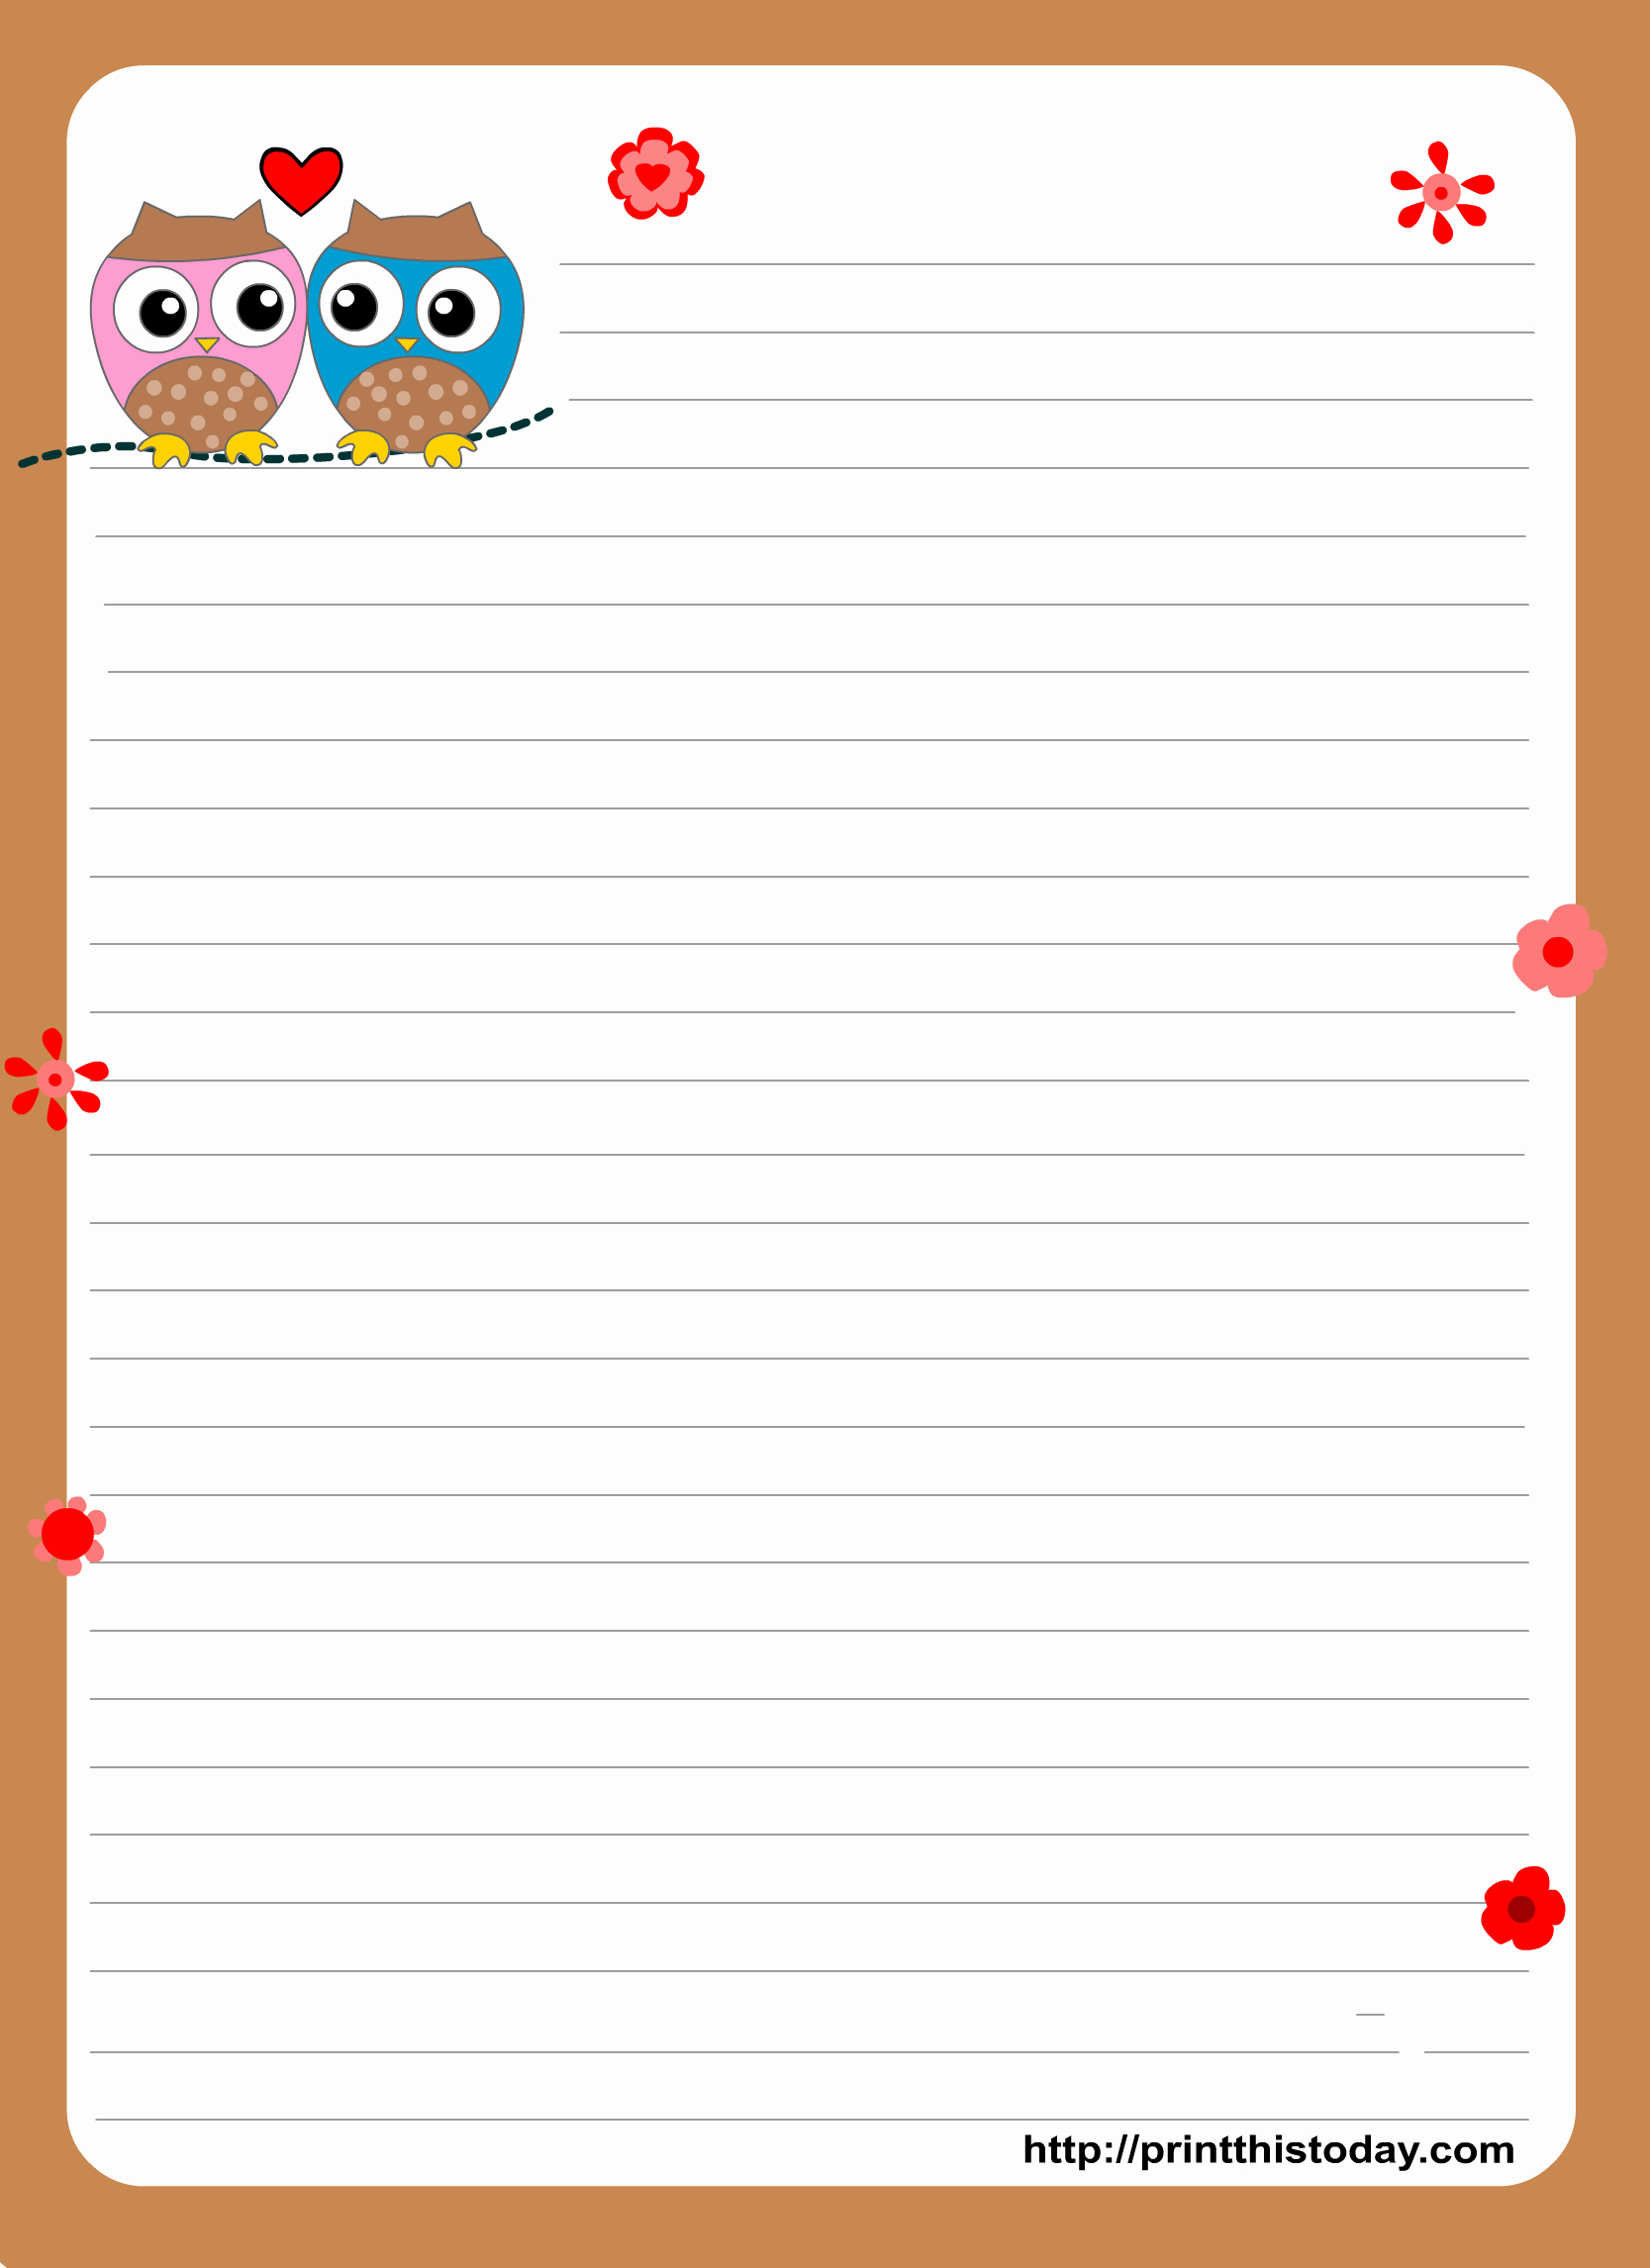 Free Printable Lined Paper Beautiful 1000 Images About Free Printable Stationary On Pinterest